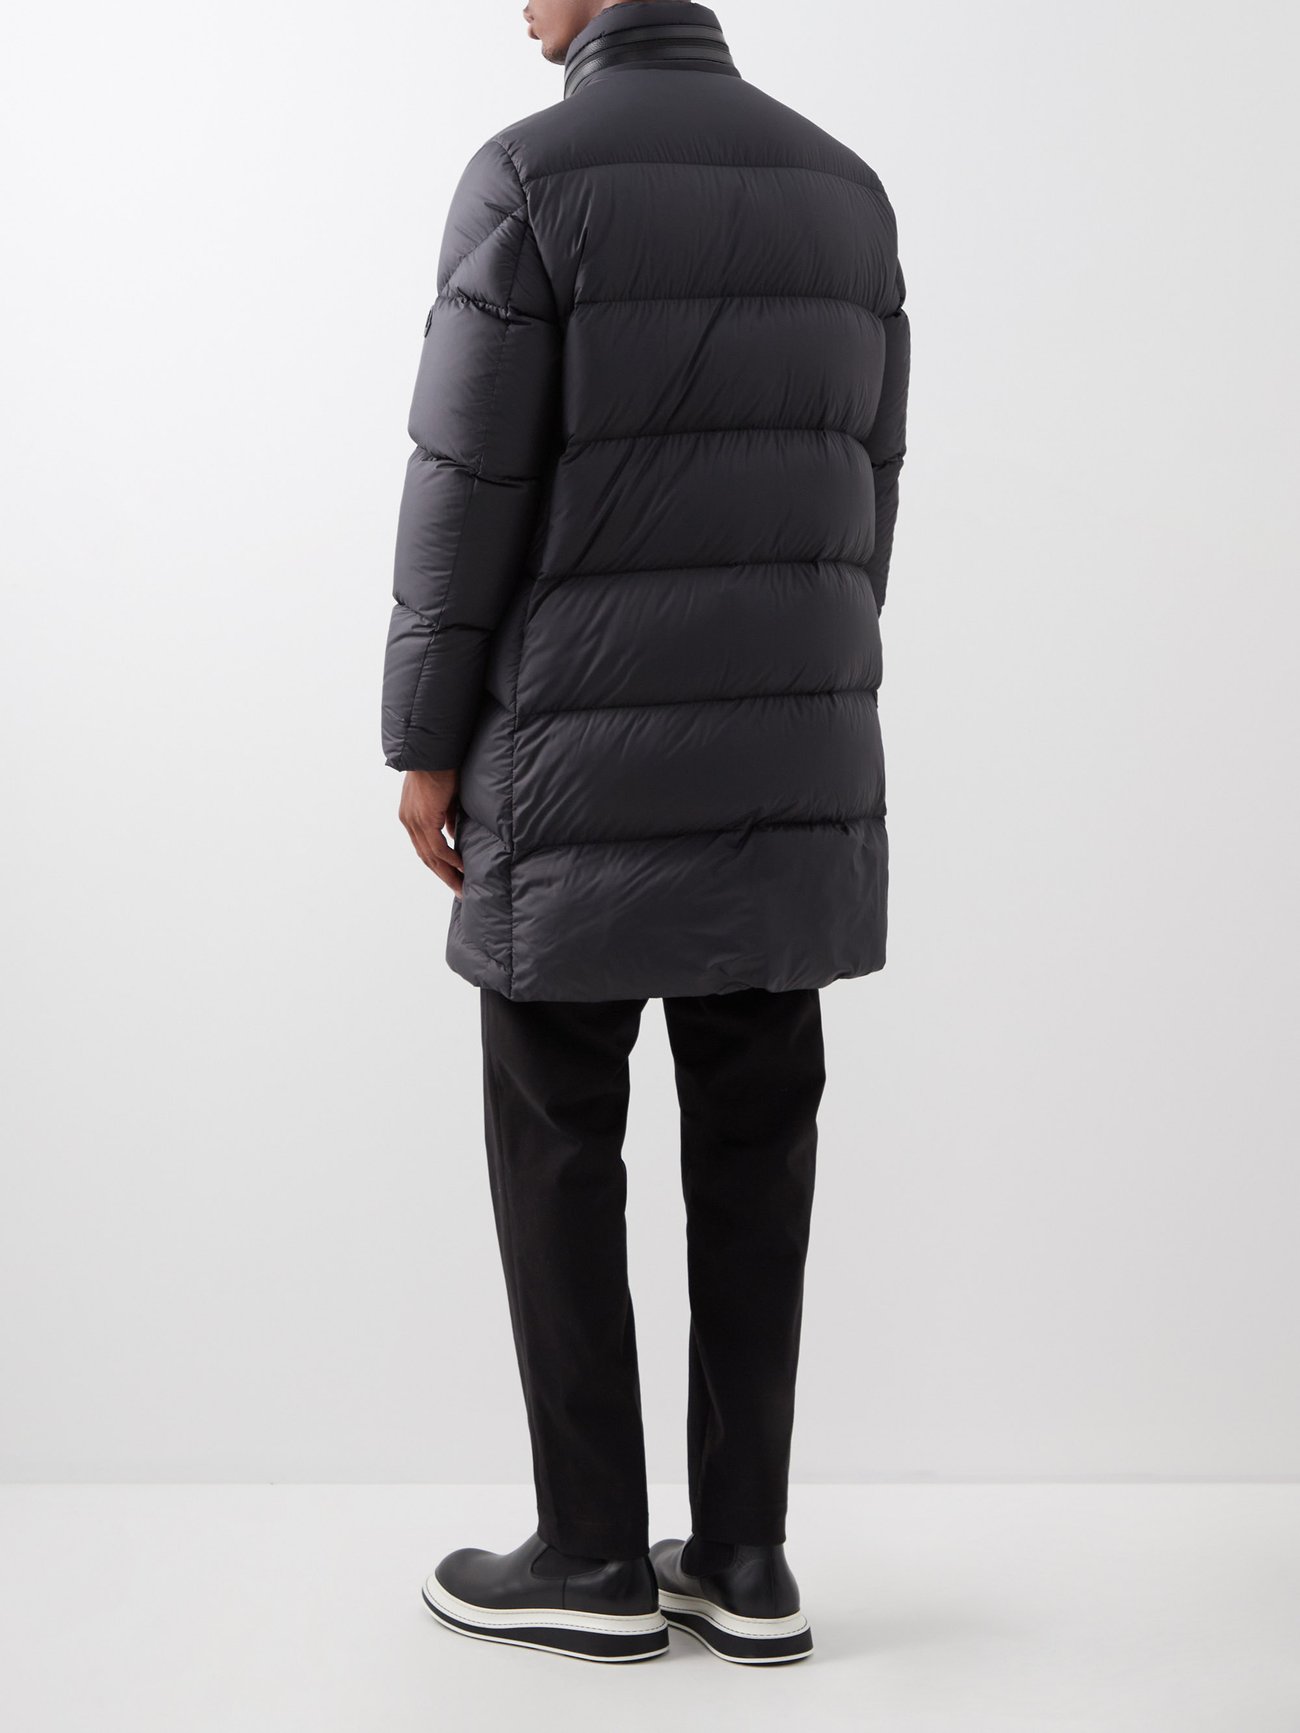 Black Guirec quilted down coat, Moncler